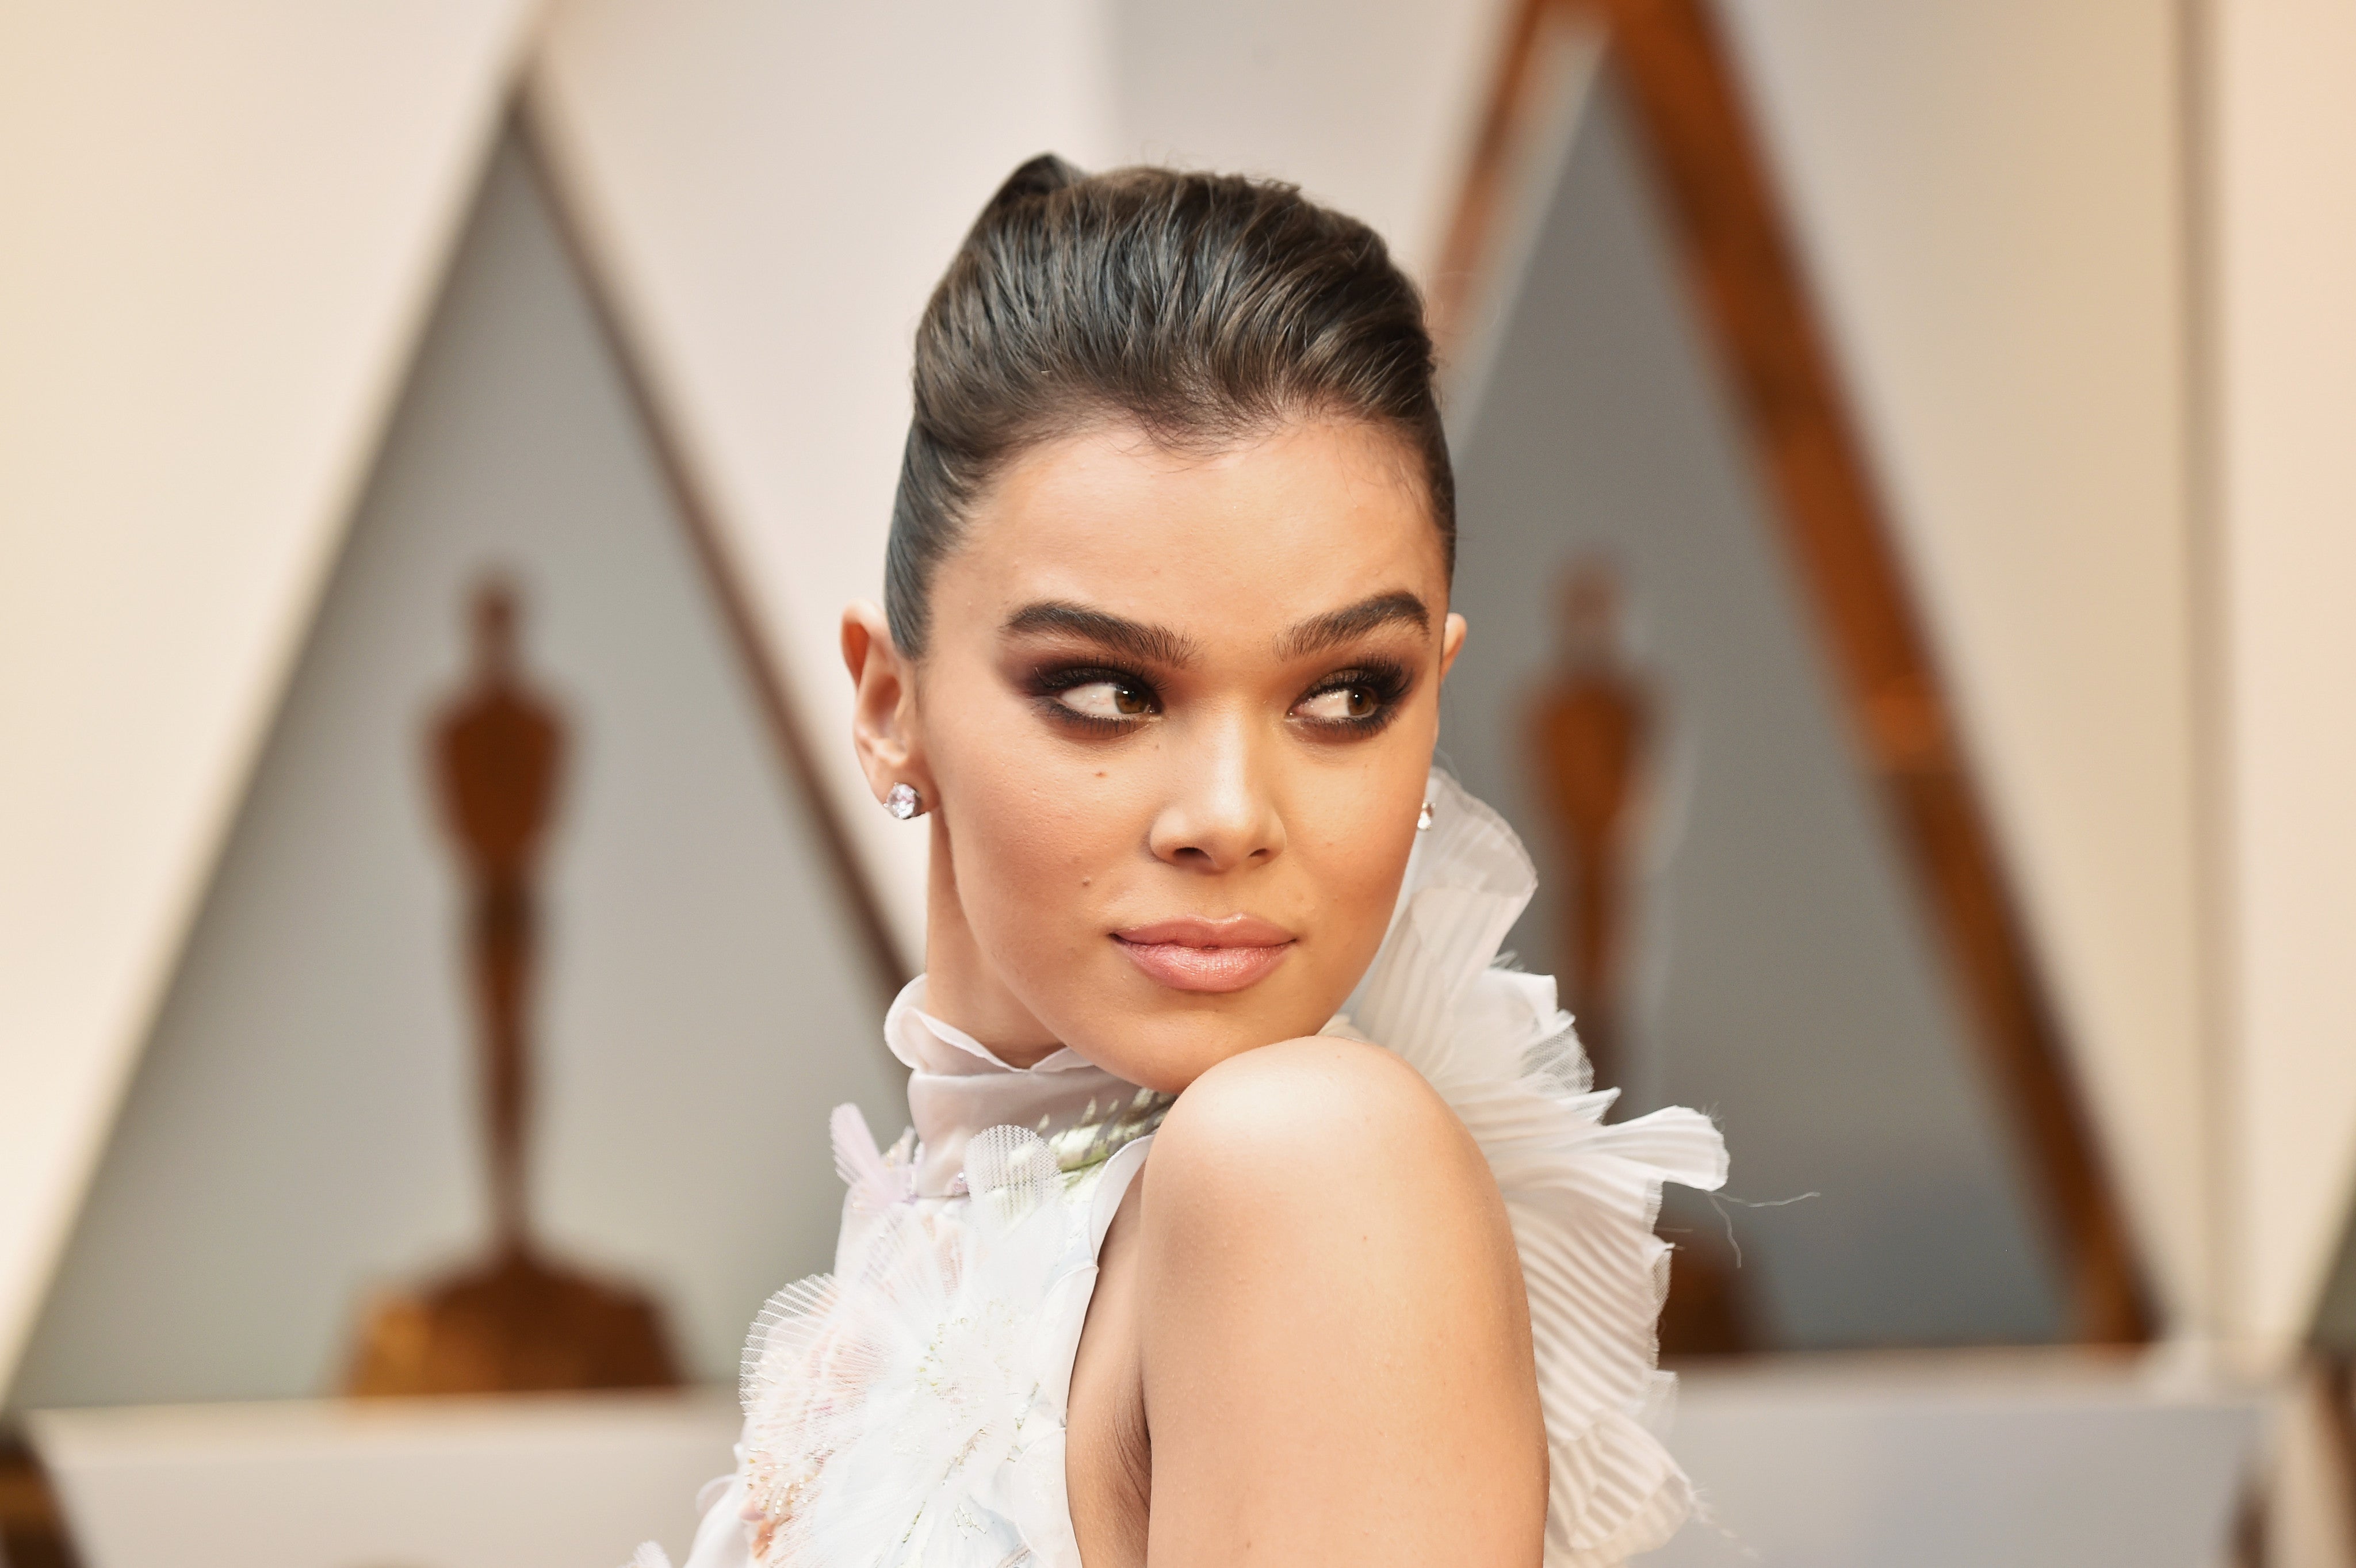 The Weird Move Hailee Steinfeld Does to Stay Fit While Traveling